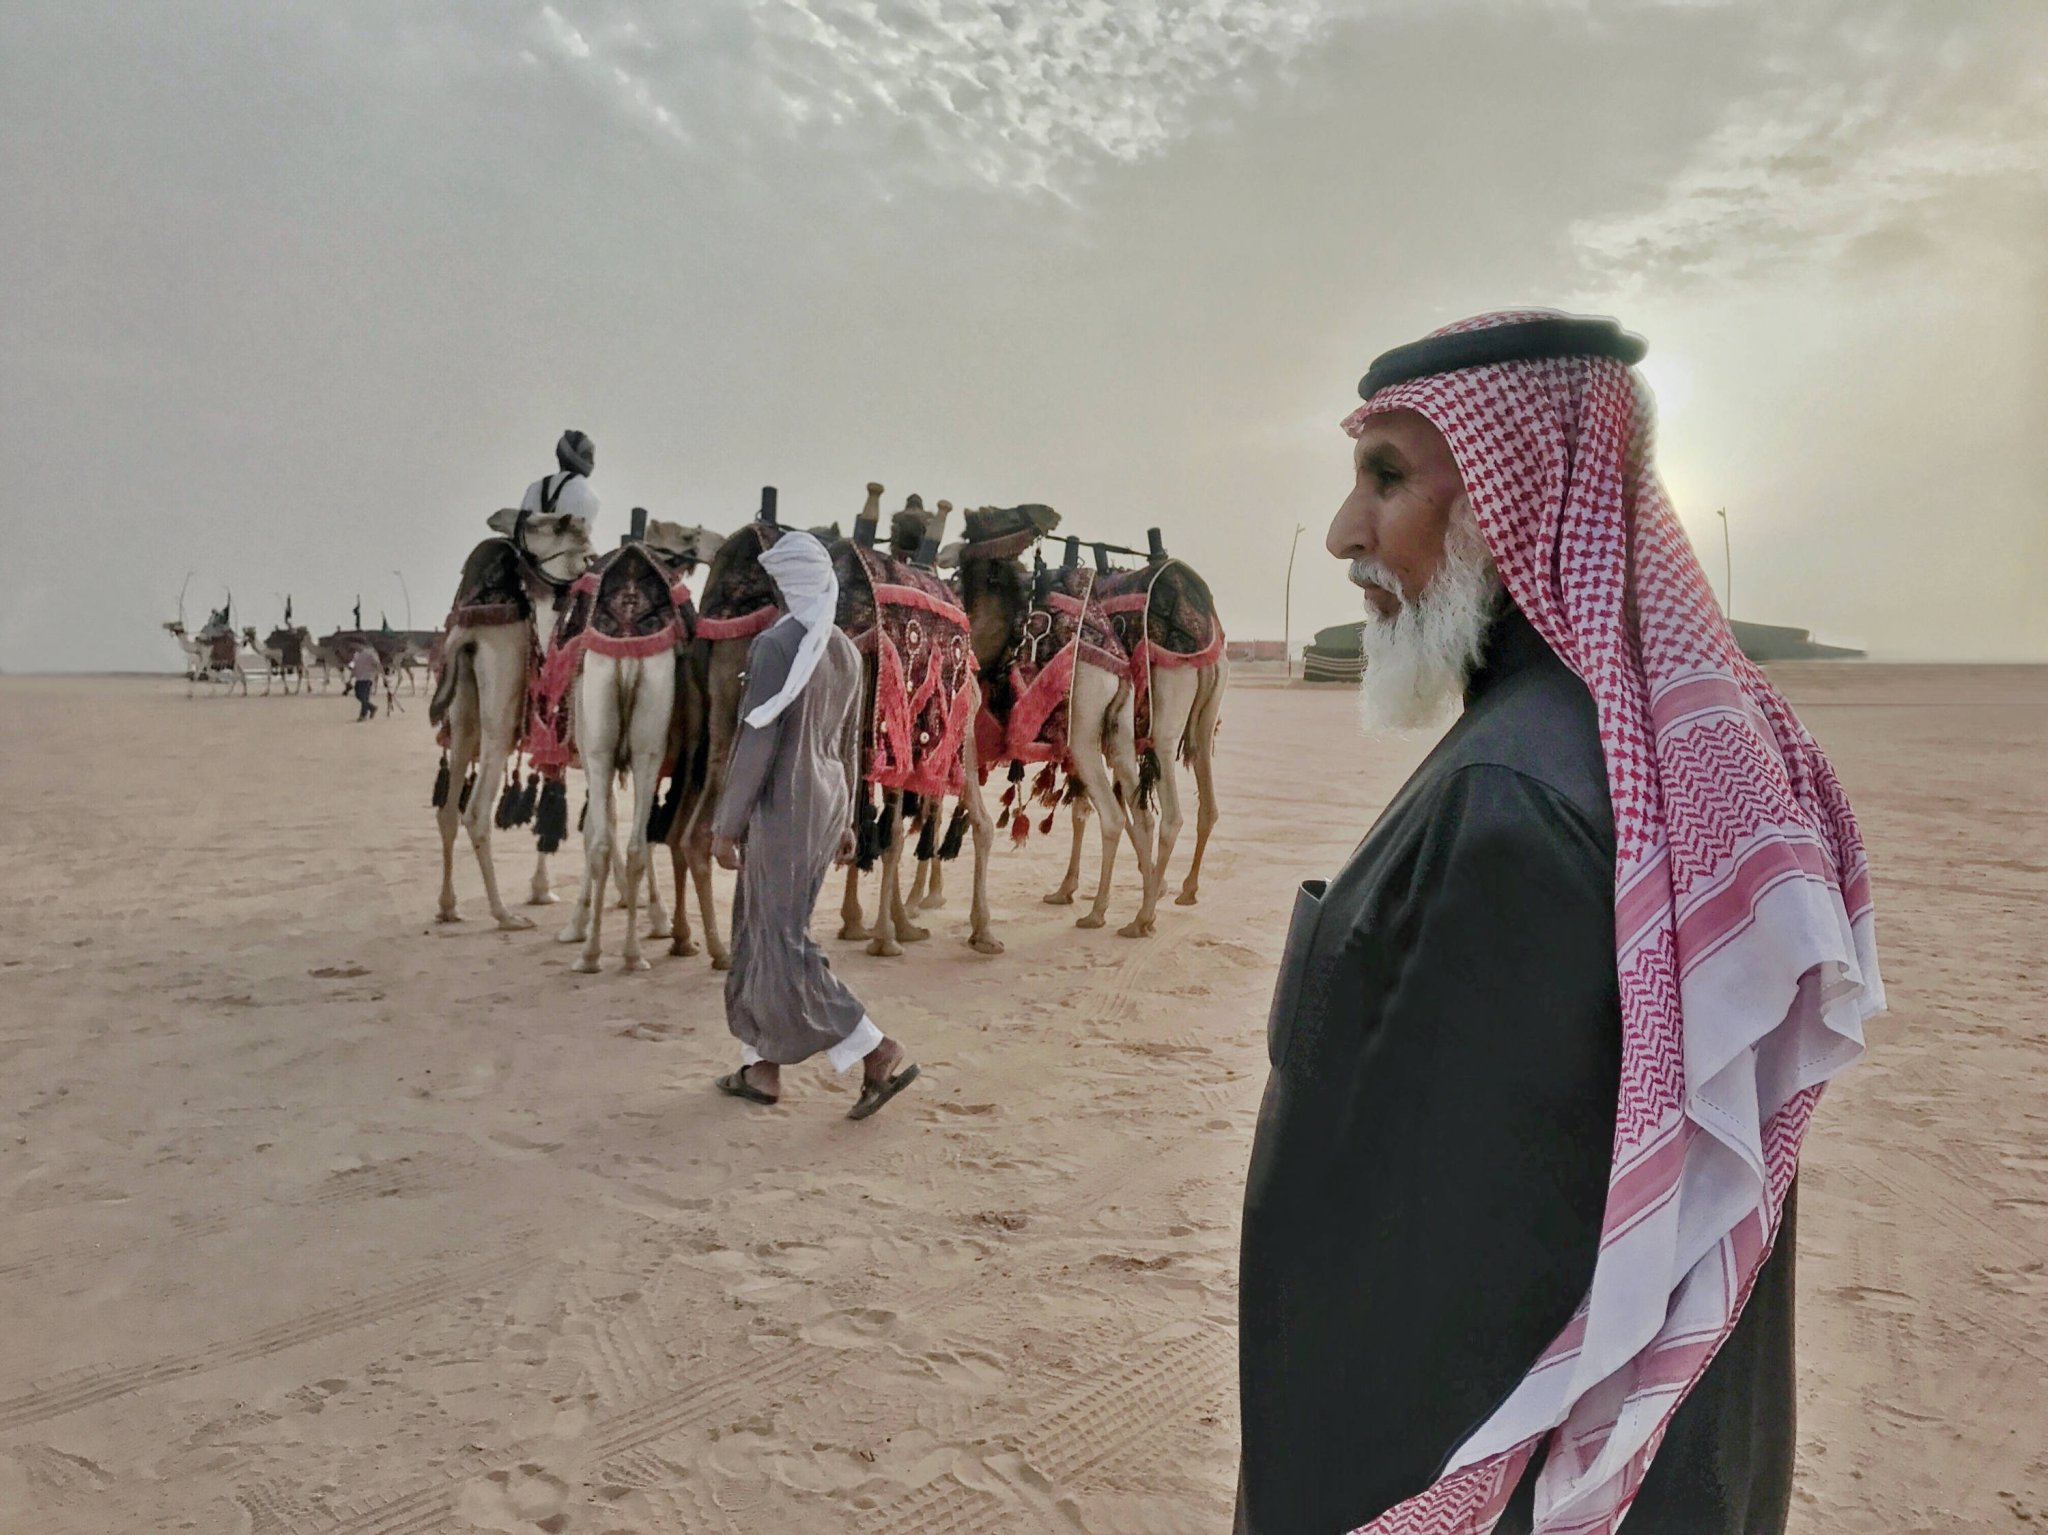 Why Street Photography is Easy for Norah Alamri In Saudi Arabia